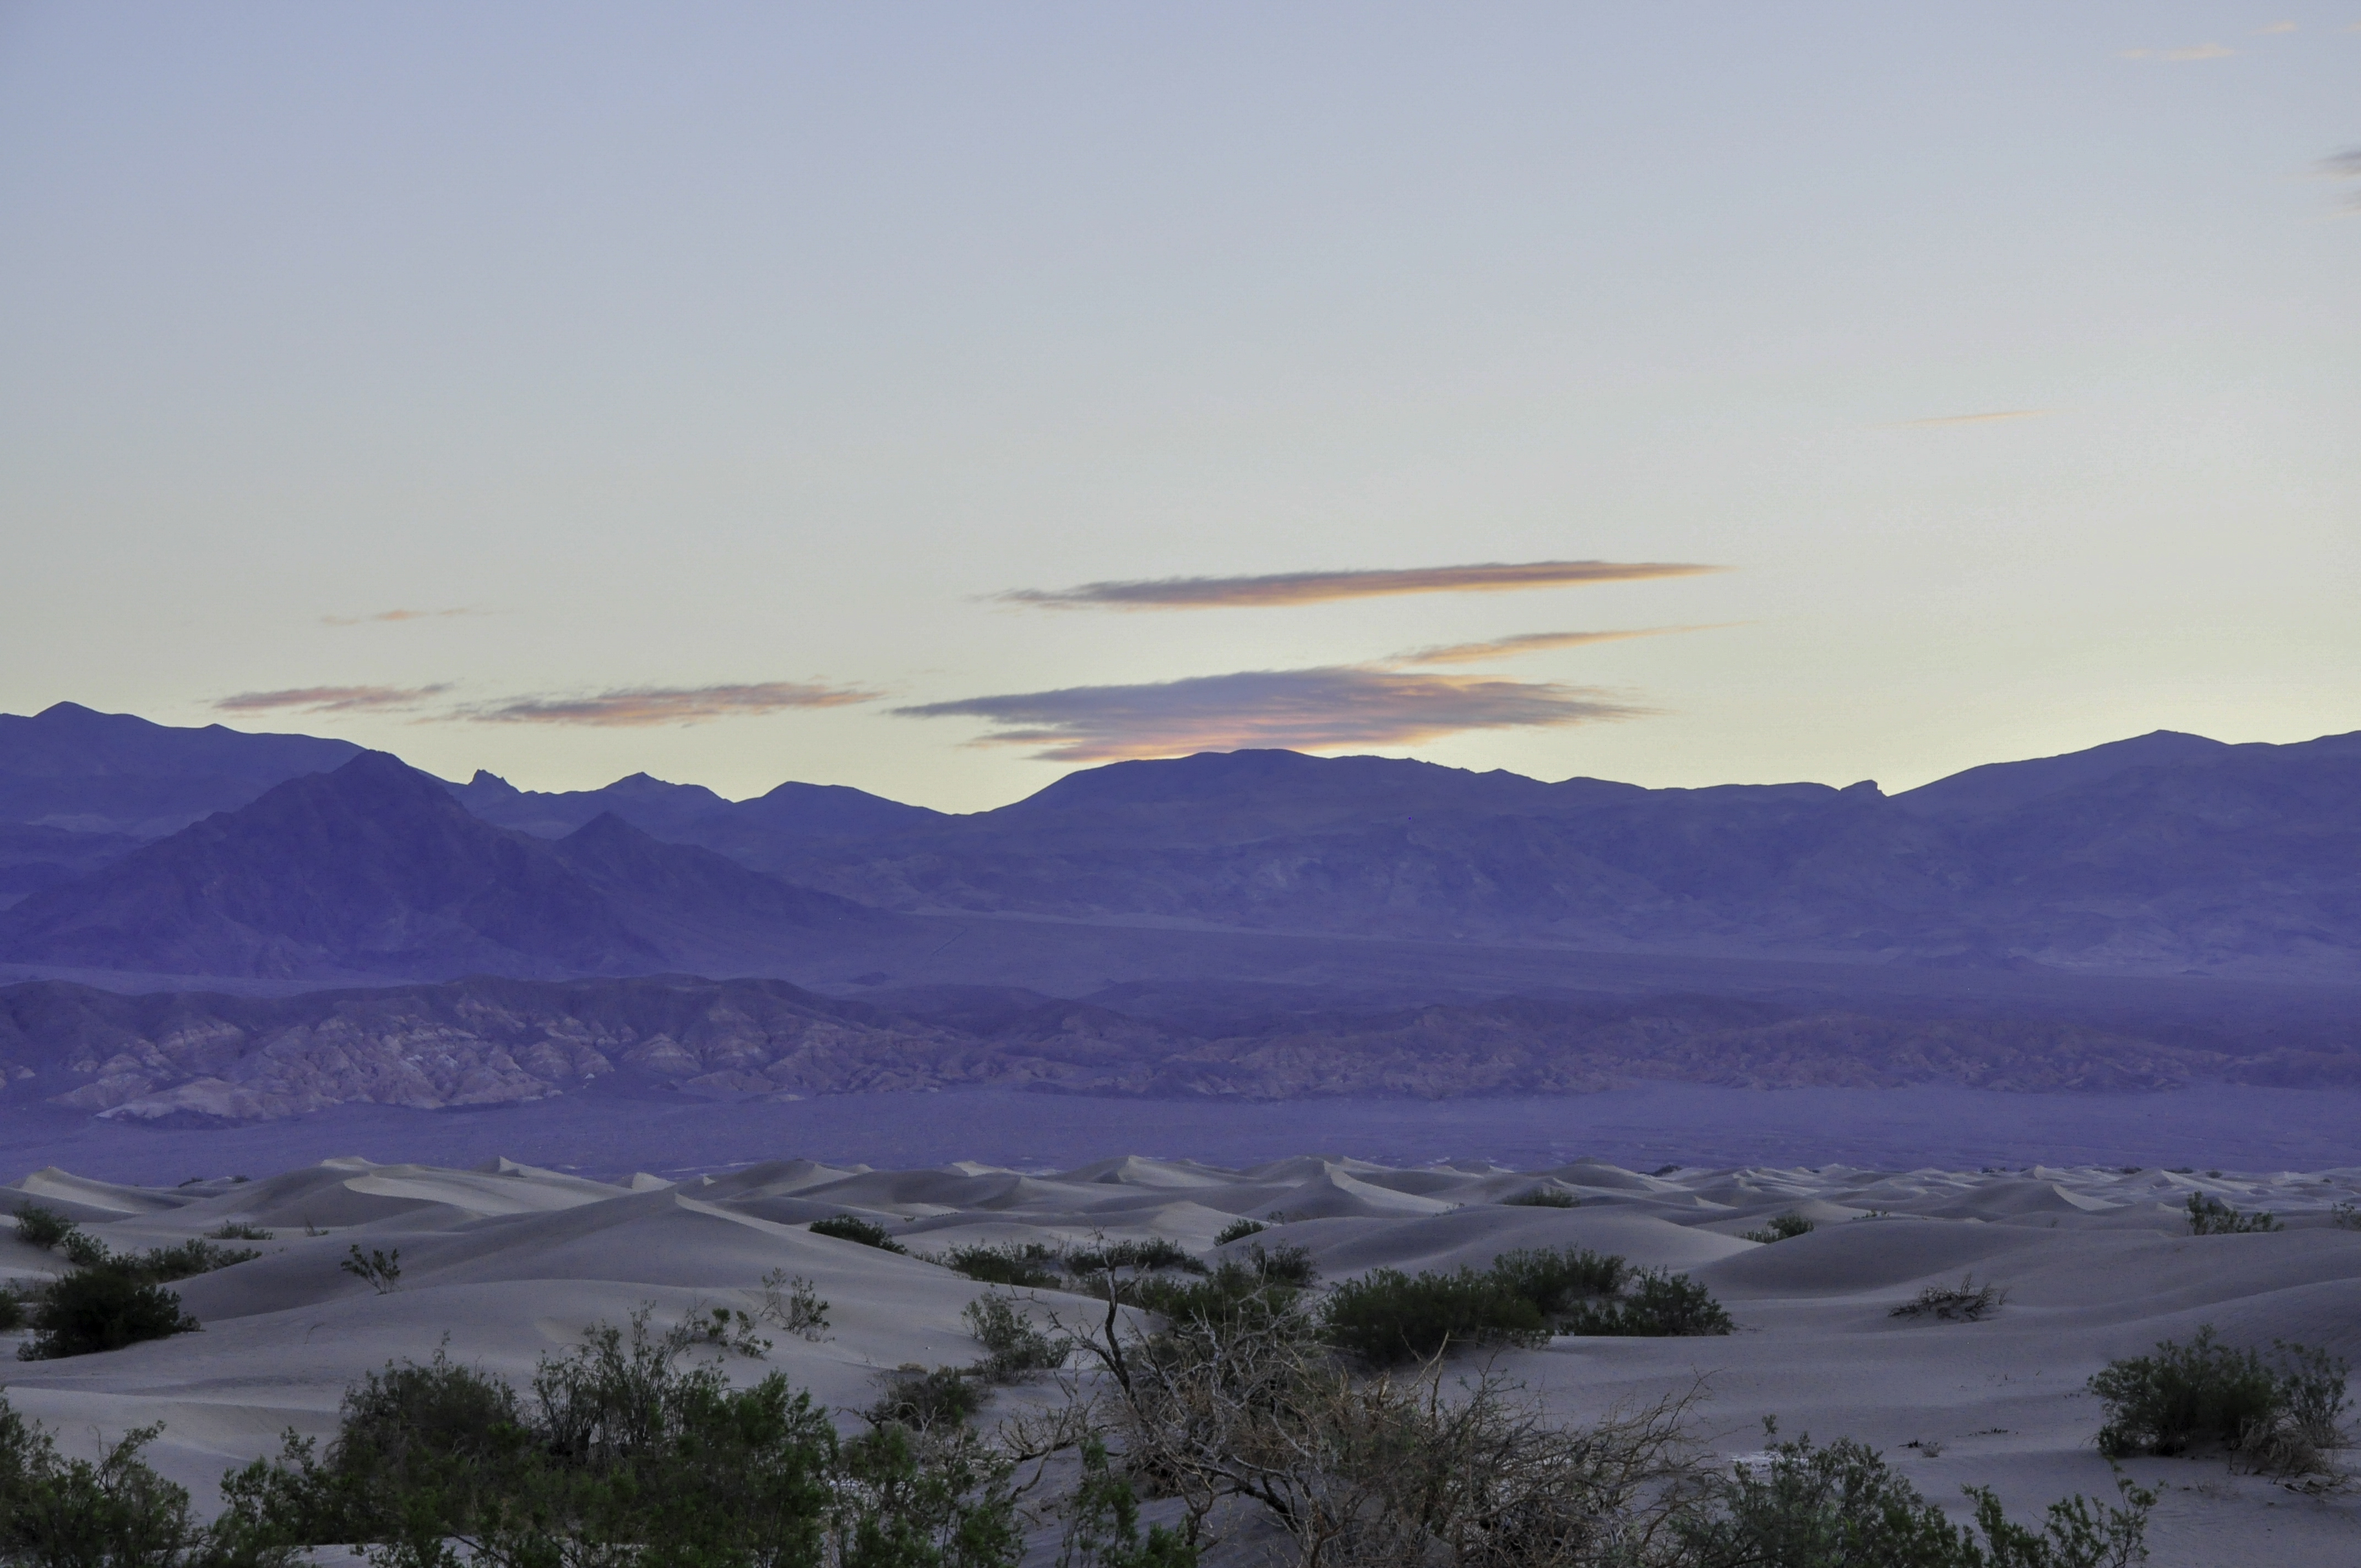 Sunrise Adventures at Death Valley National Park